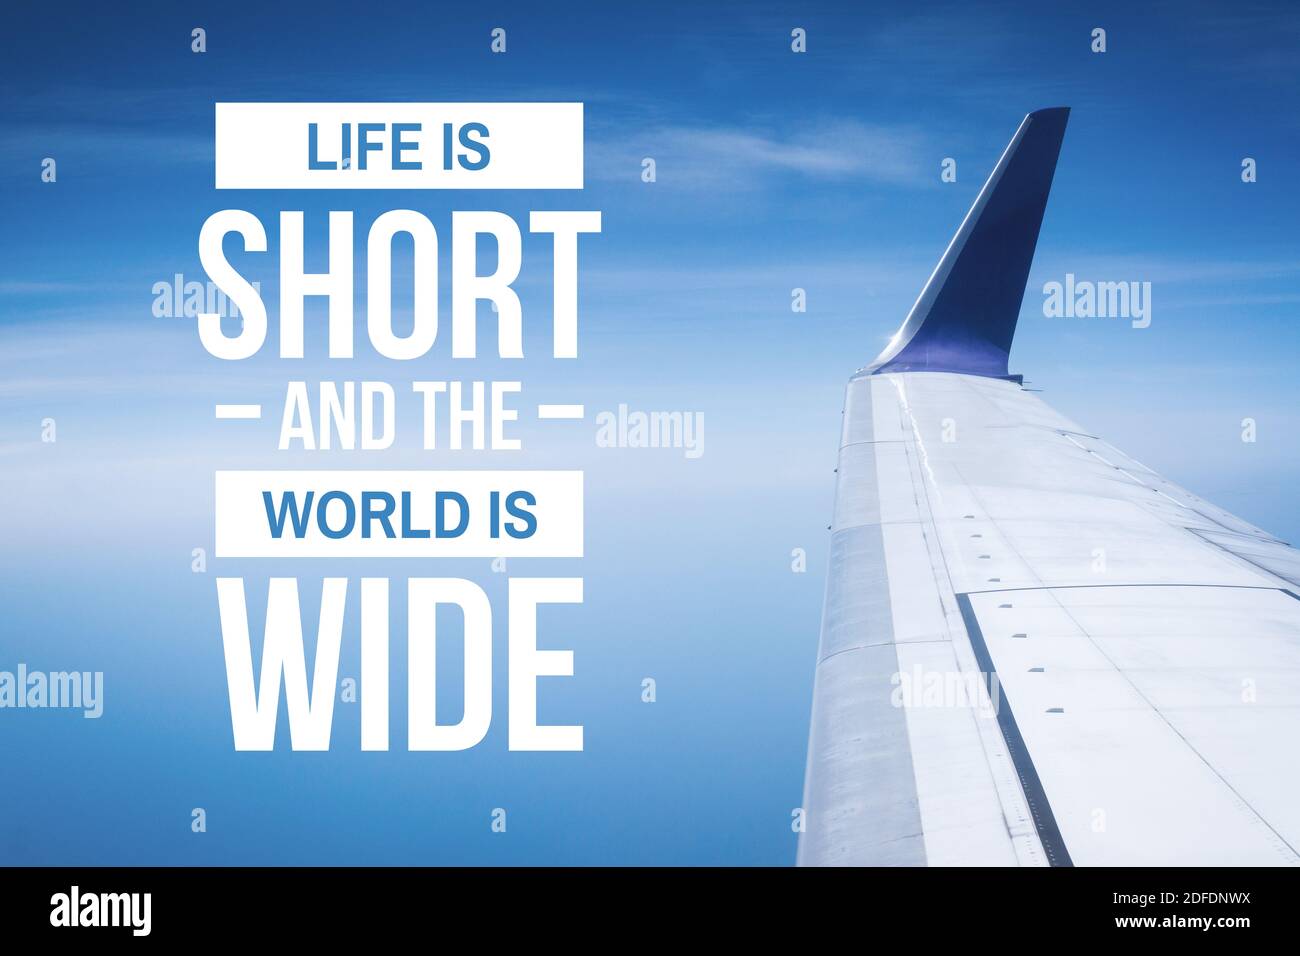 Travel, Adventure and Exploration Quote. Life is Short and The World is Wide. Airplane Wings Against Blue Sky. Stock Photo